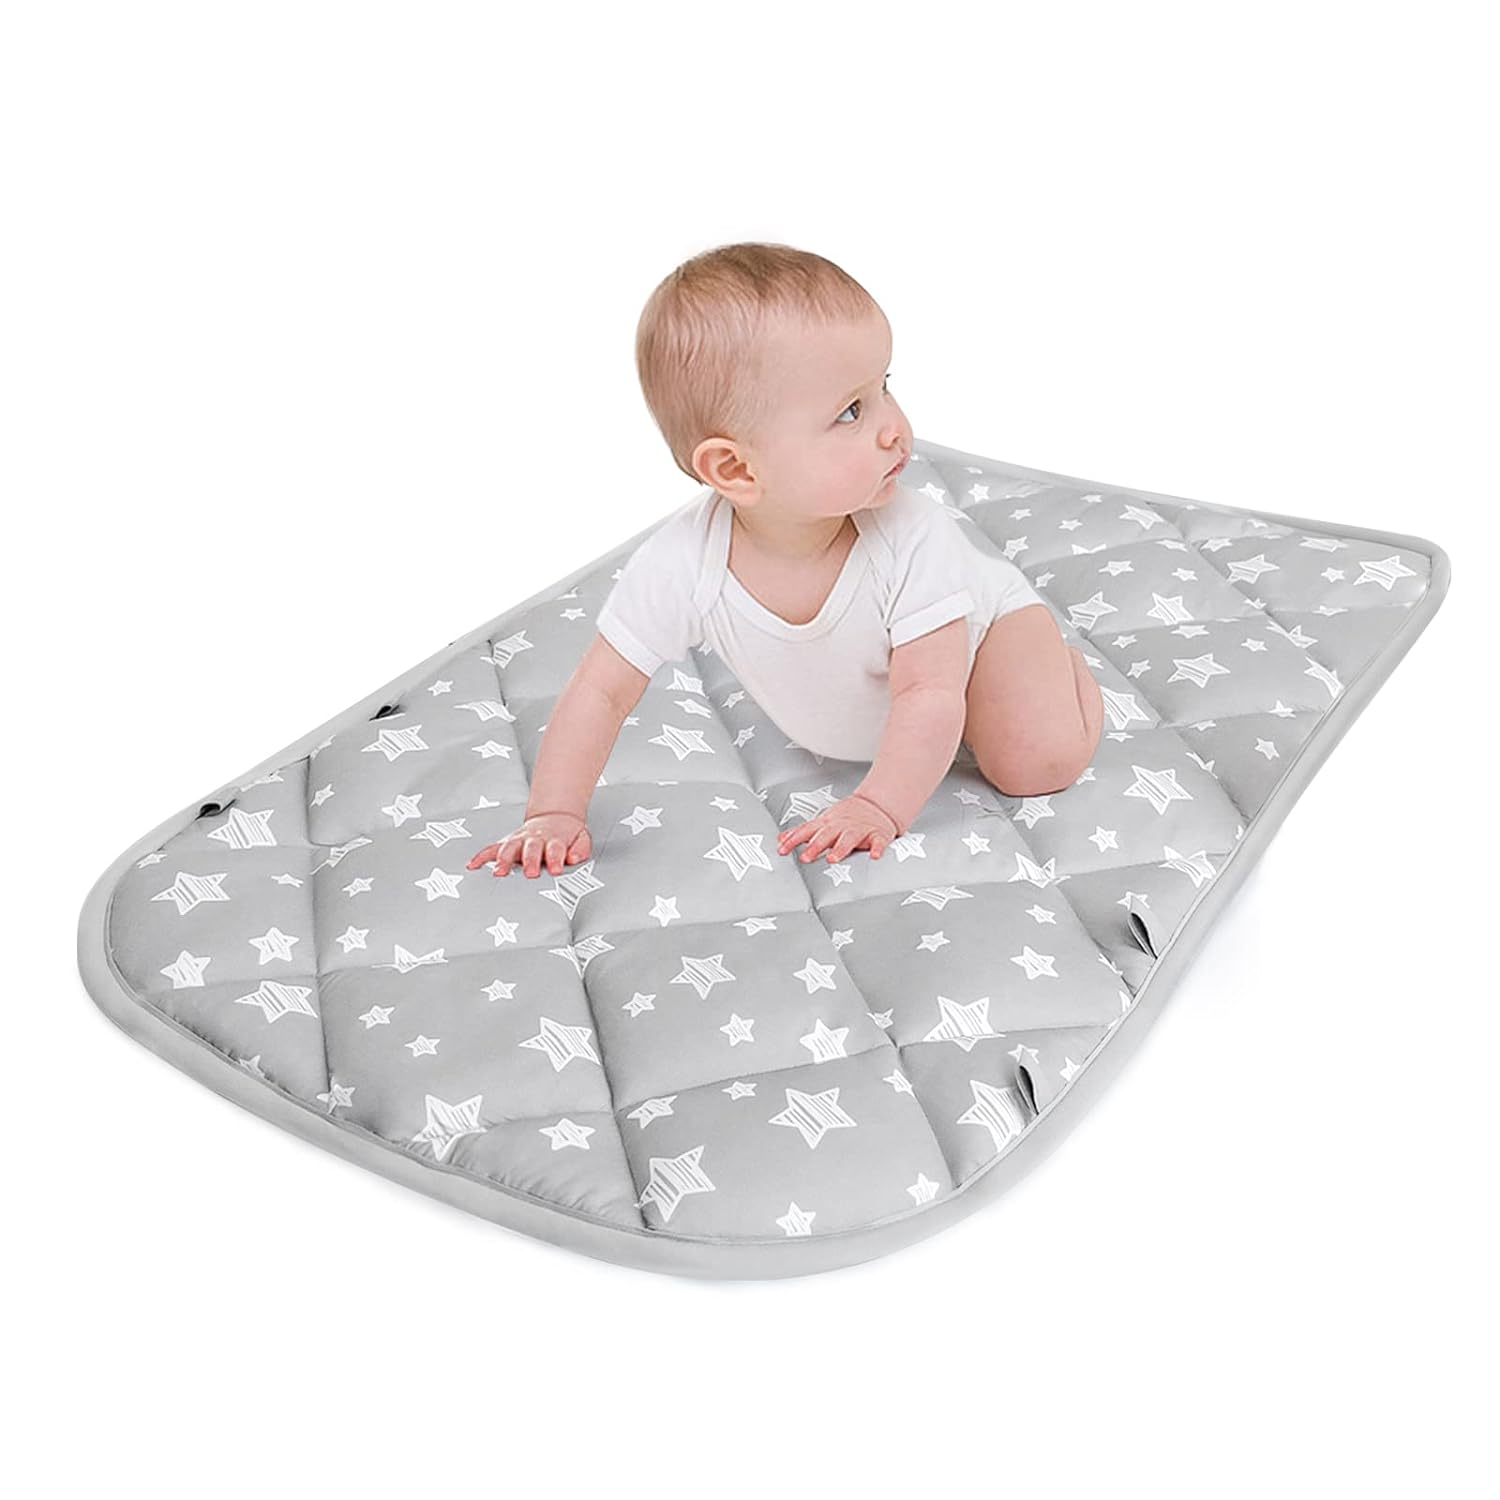 Baby Play Mat - Compatible with Fisher-Price Deluxe Kick 'n Play Piano Gym, Grey Star - Moonsea Bedding